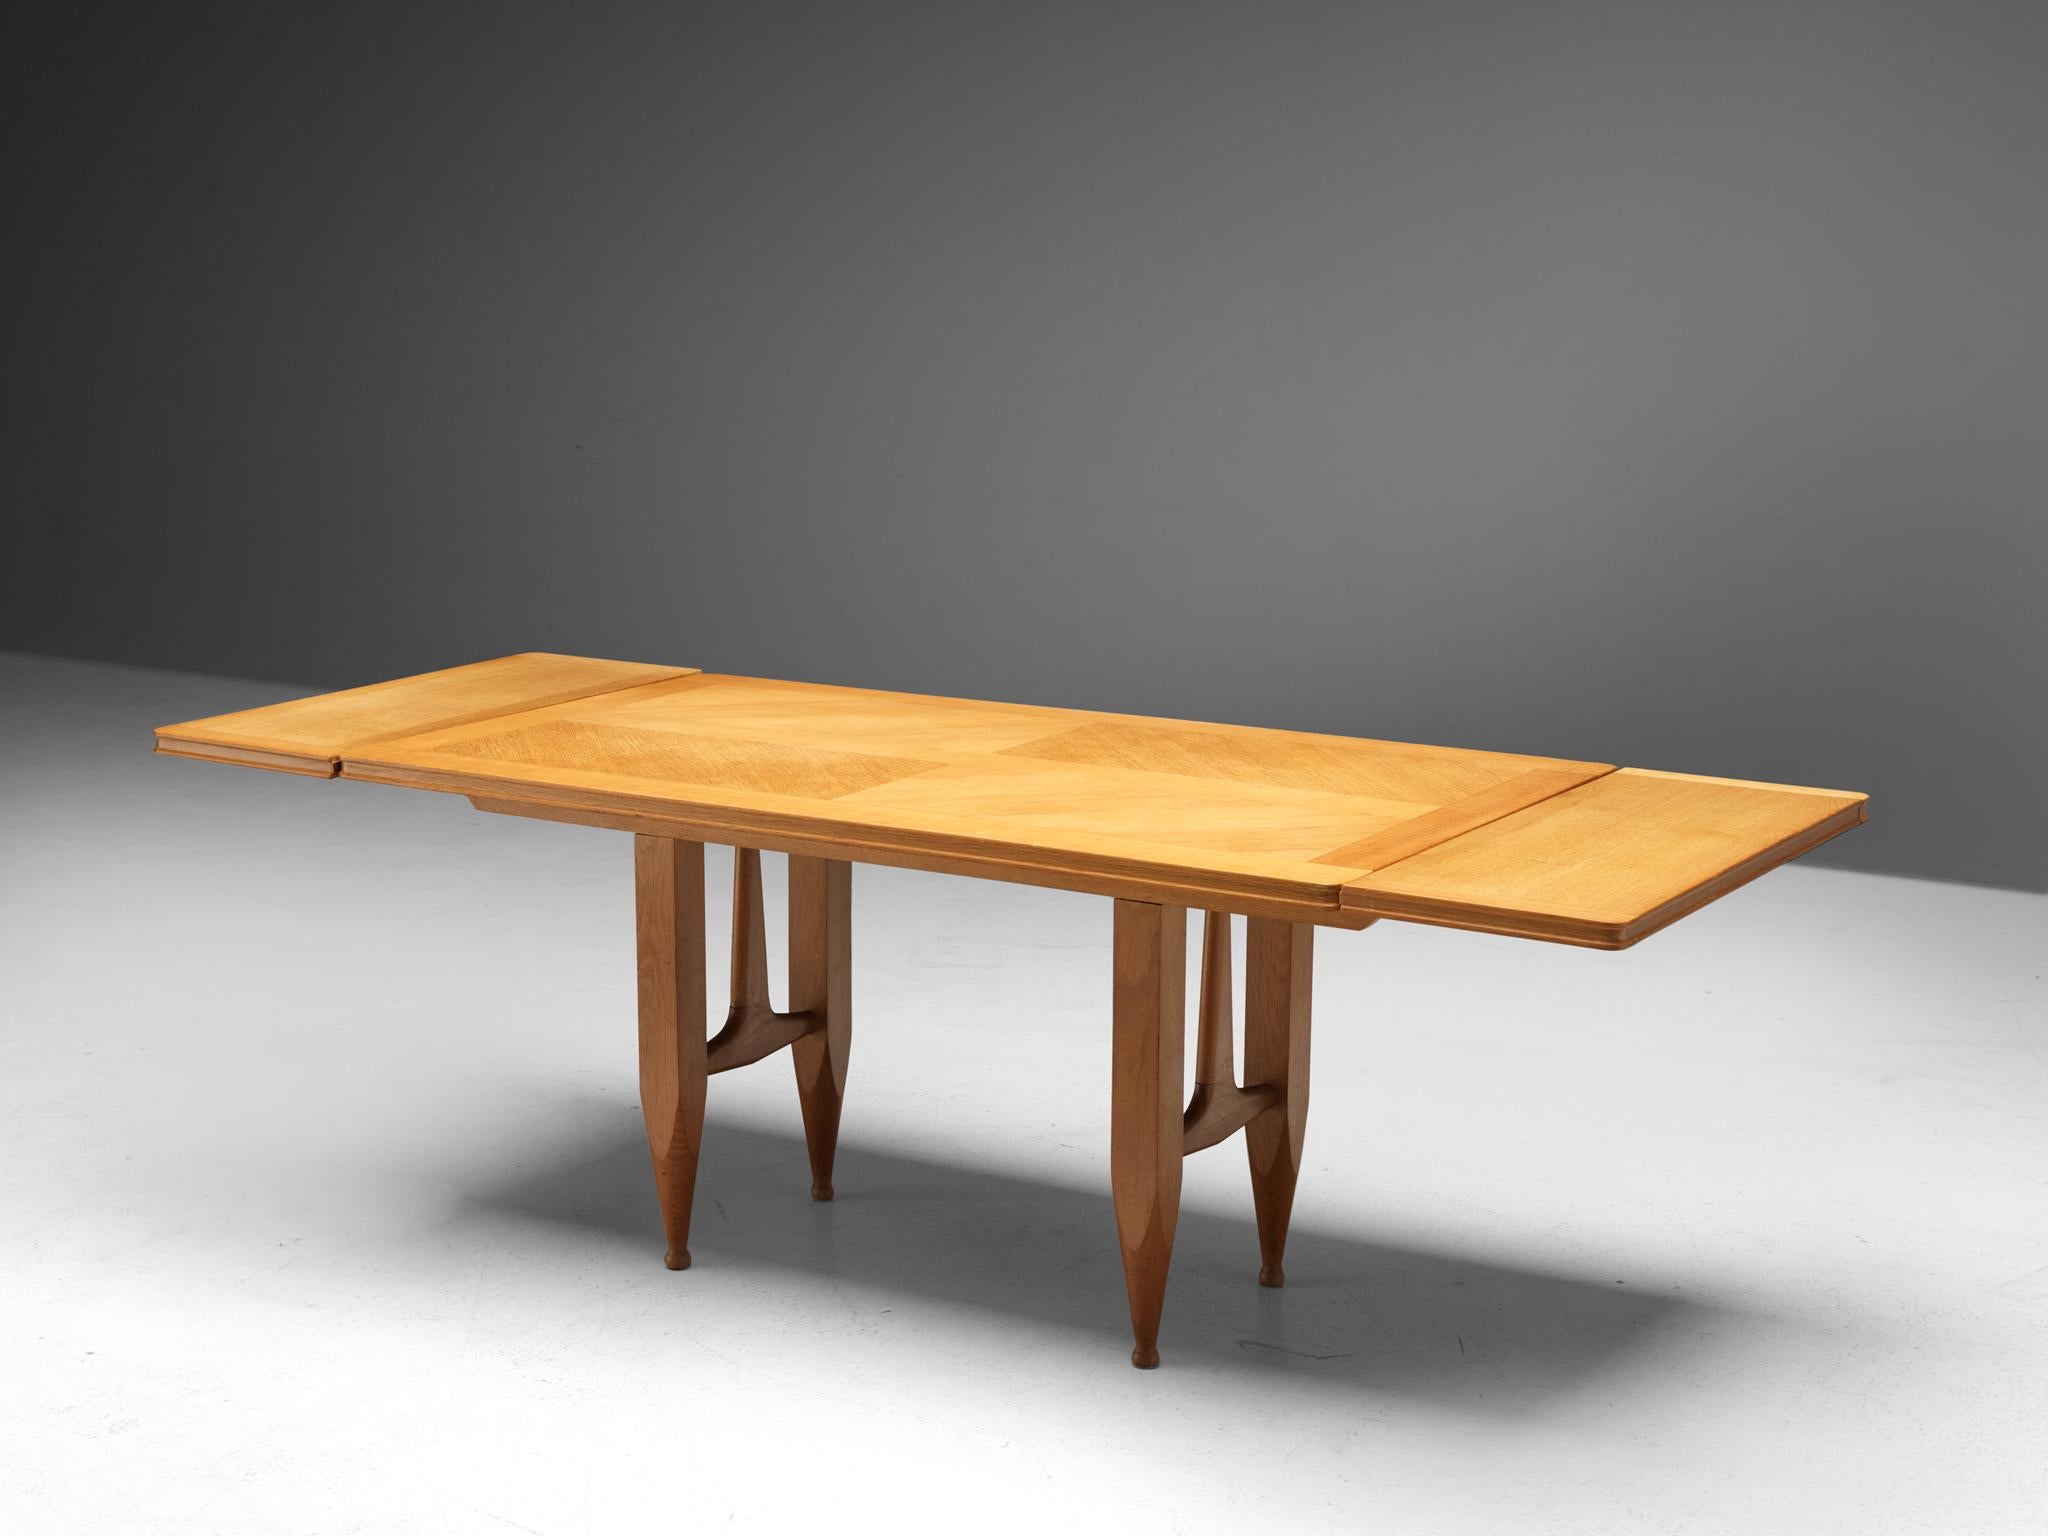 Guillerme et Chambron for Votre Maison, extendable dining table, oak, 1960s.

Oval shaped dining table with inlayed top. This extendable table in solid oak comes with two optional leaves, which makes it a very versatile item. The sculptural two